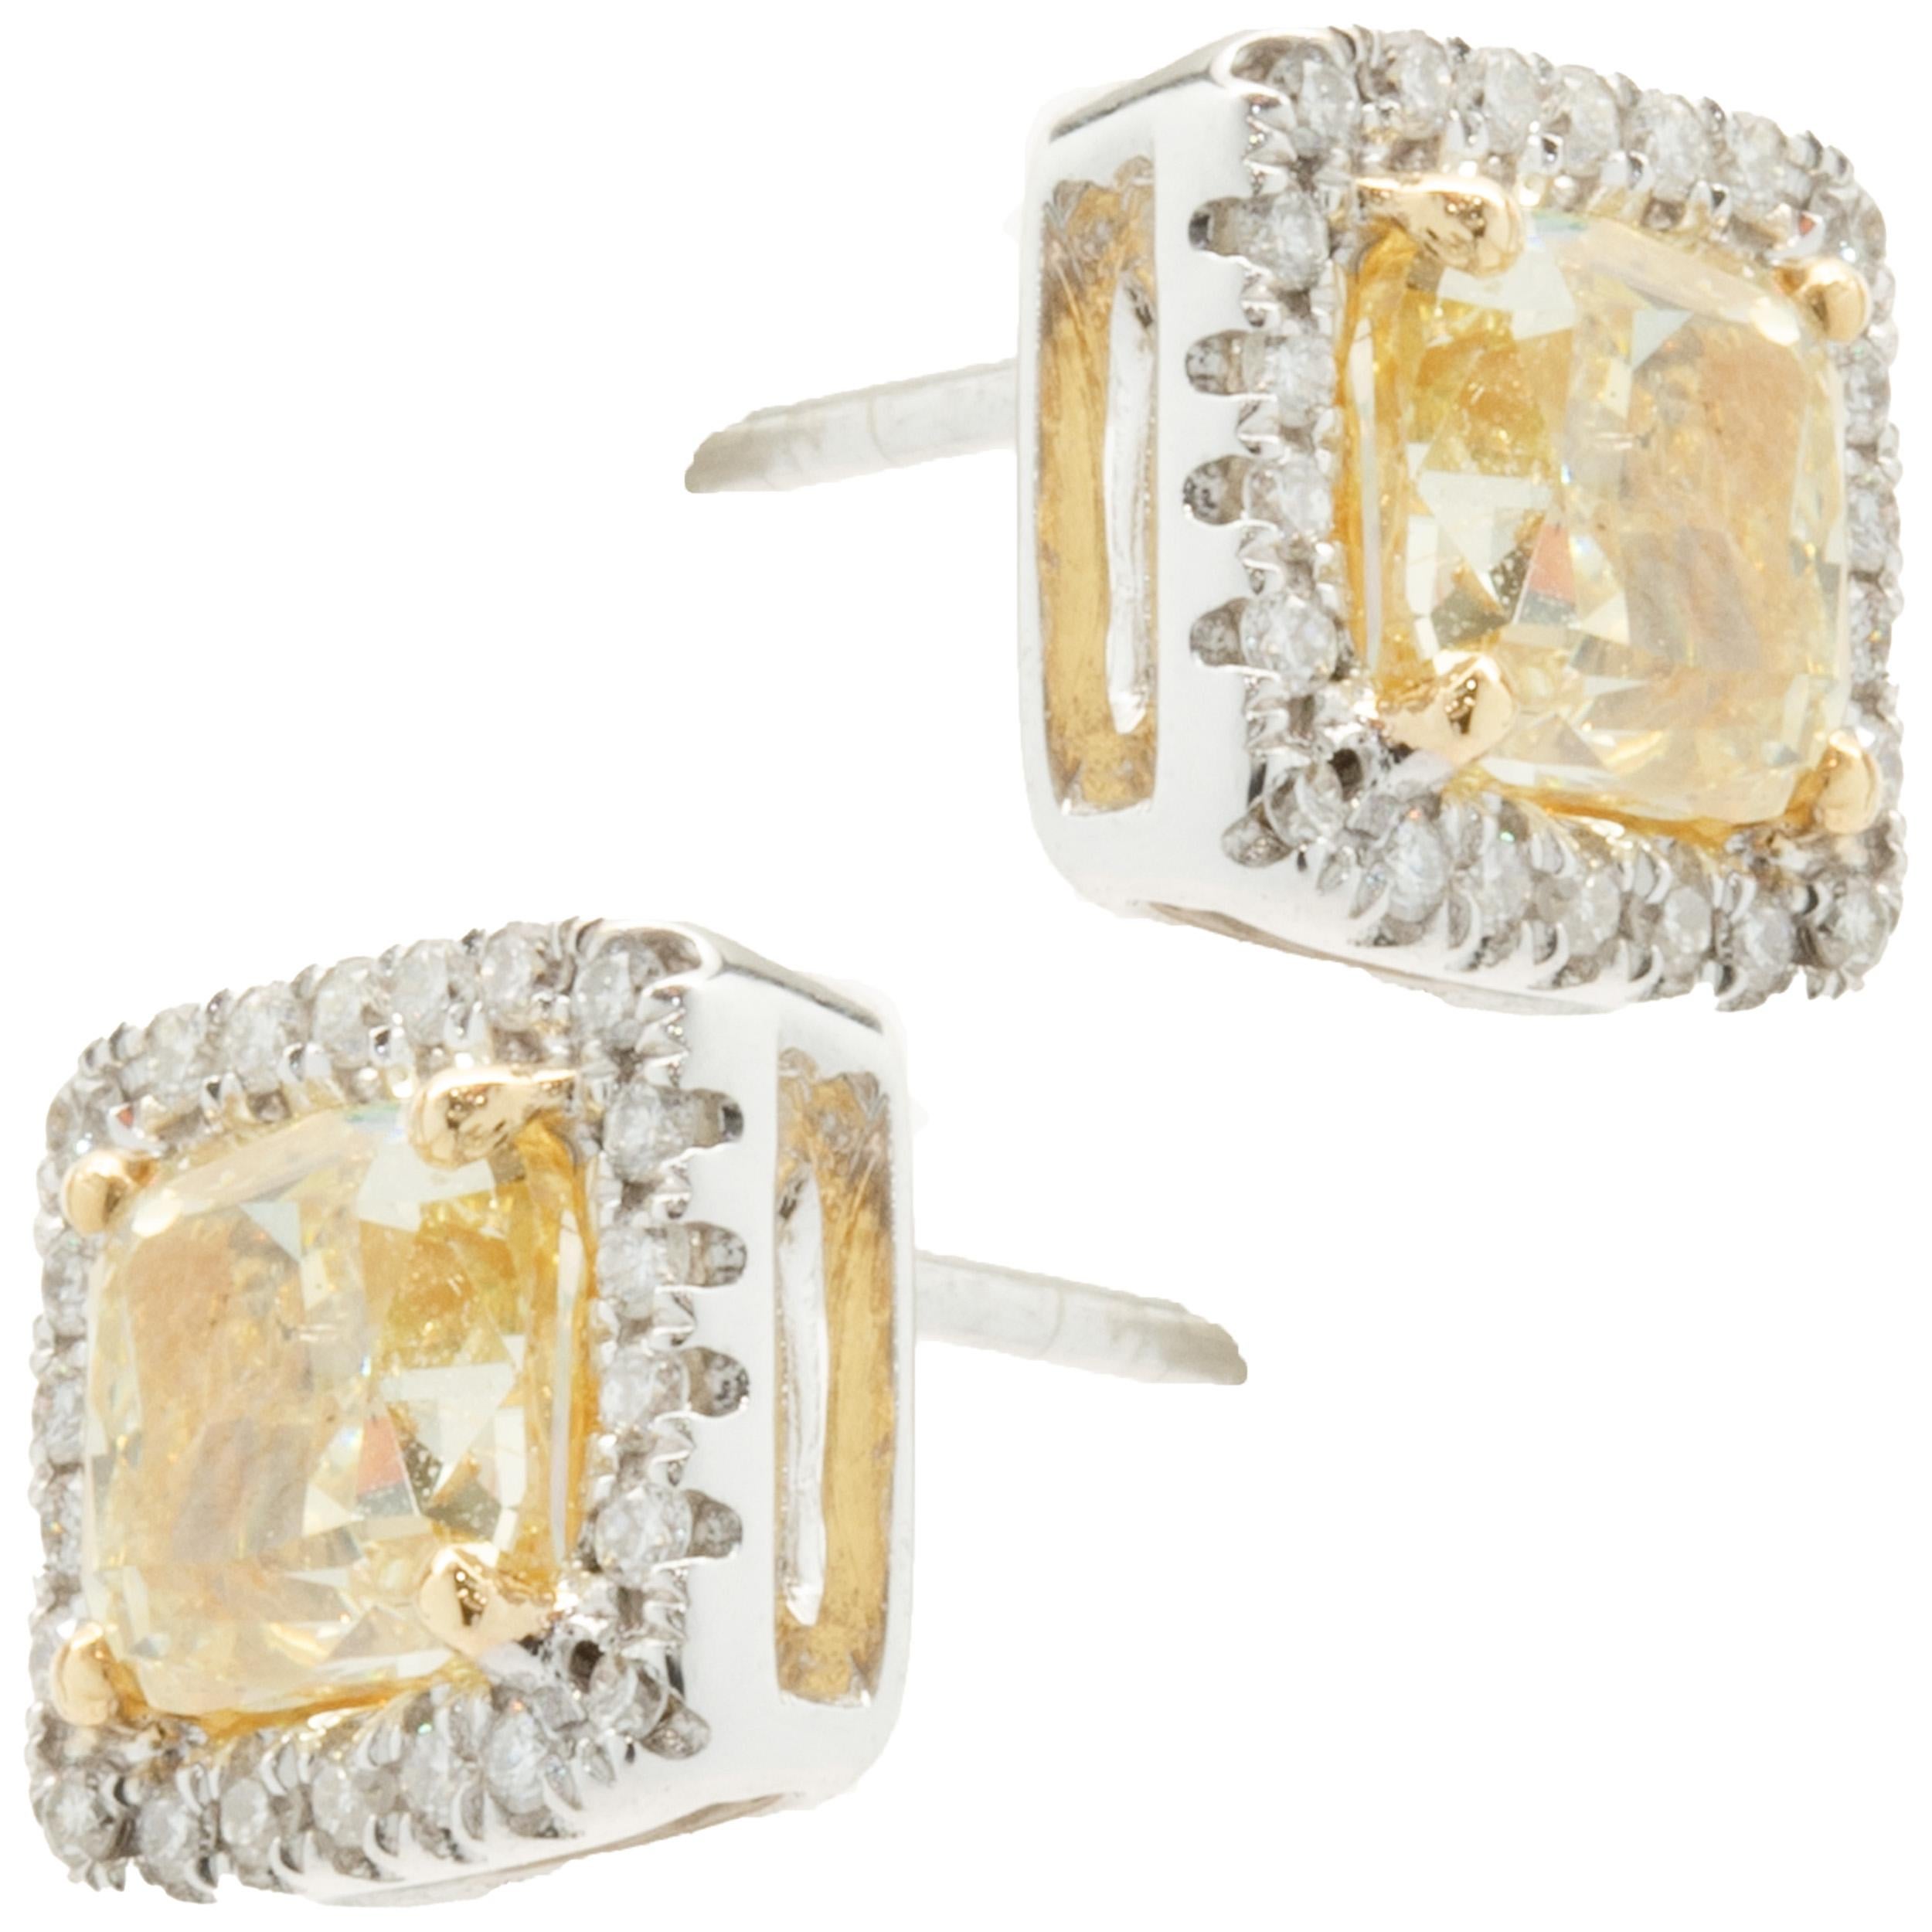 18k White & Yellow Gold Fancy Yellow Diamond Stud Earrings with Diamond Halos In Excellent Condition For Sale In Scottsdale, AZ